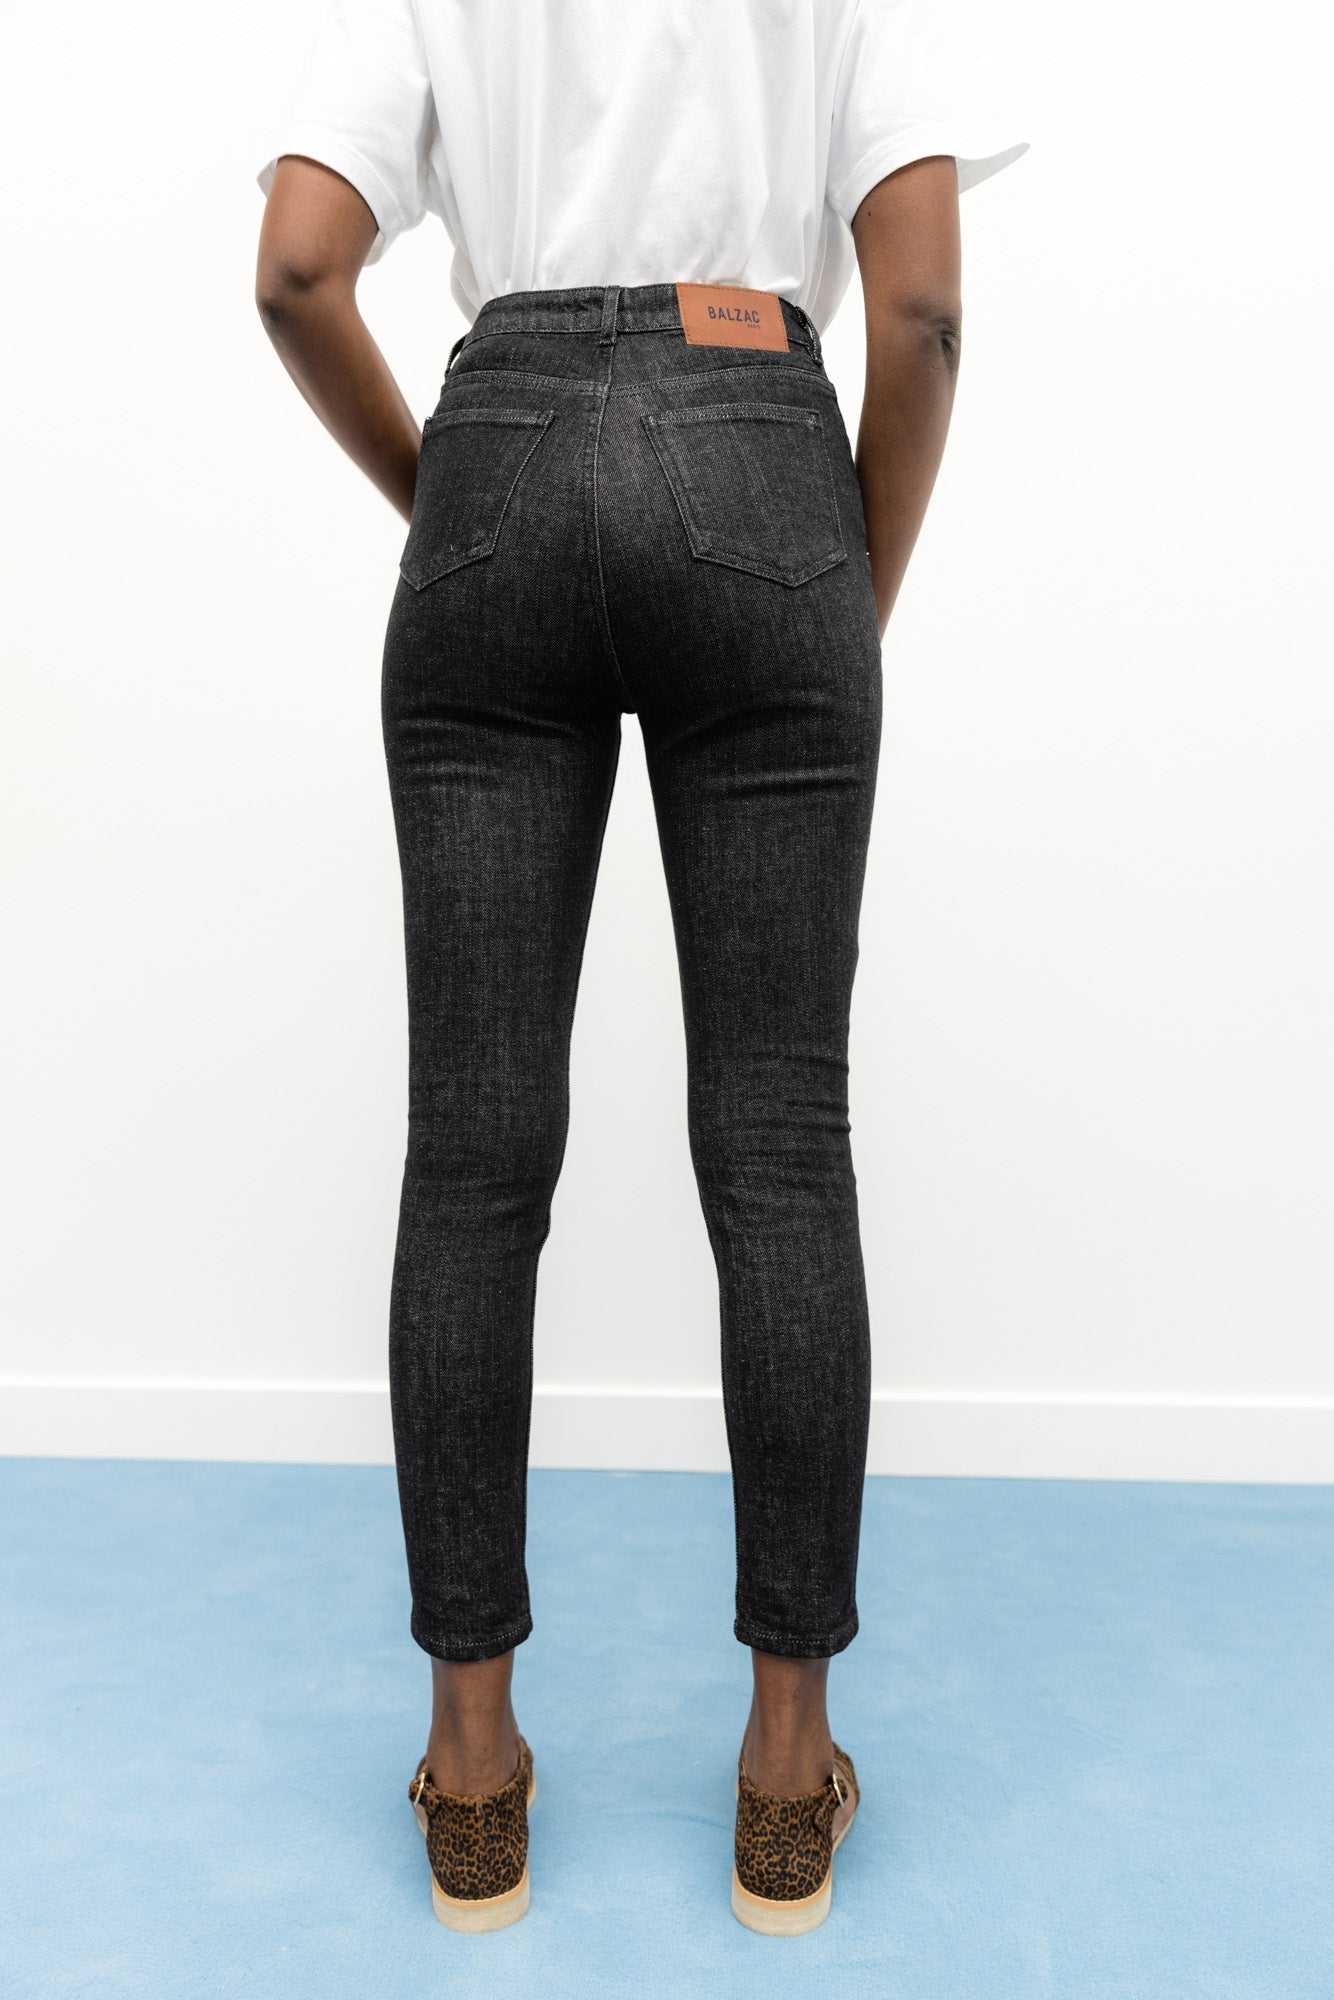 Heather black Ted jeans